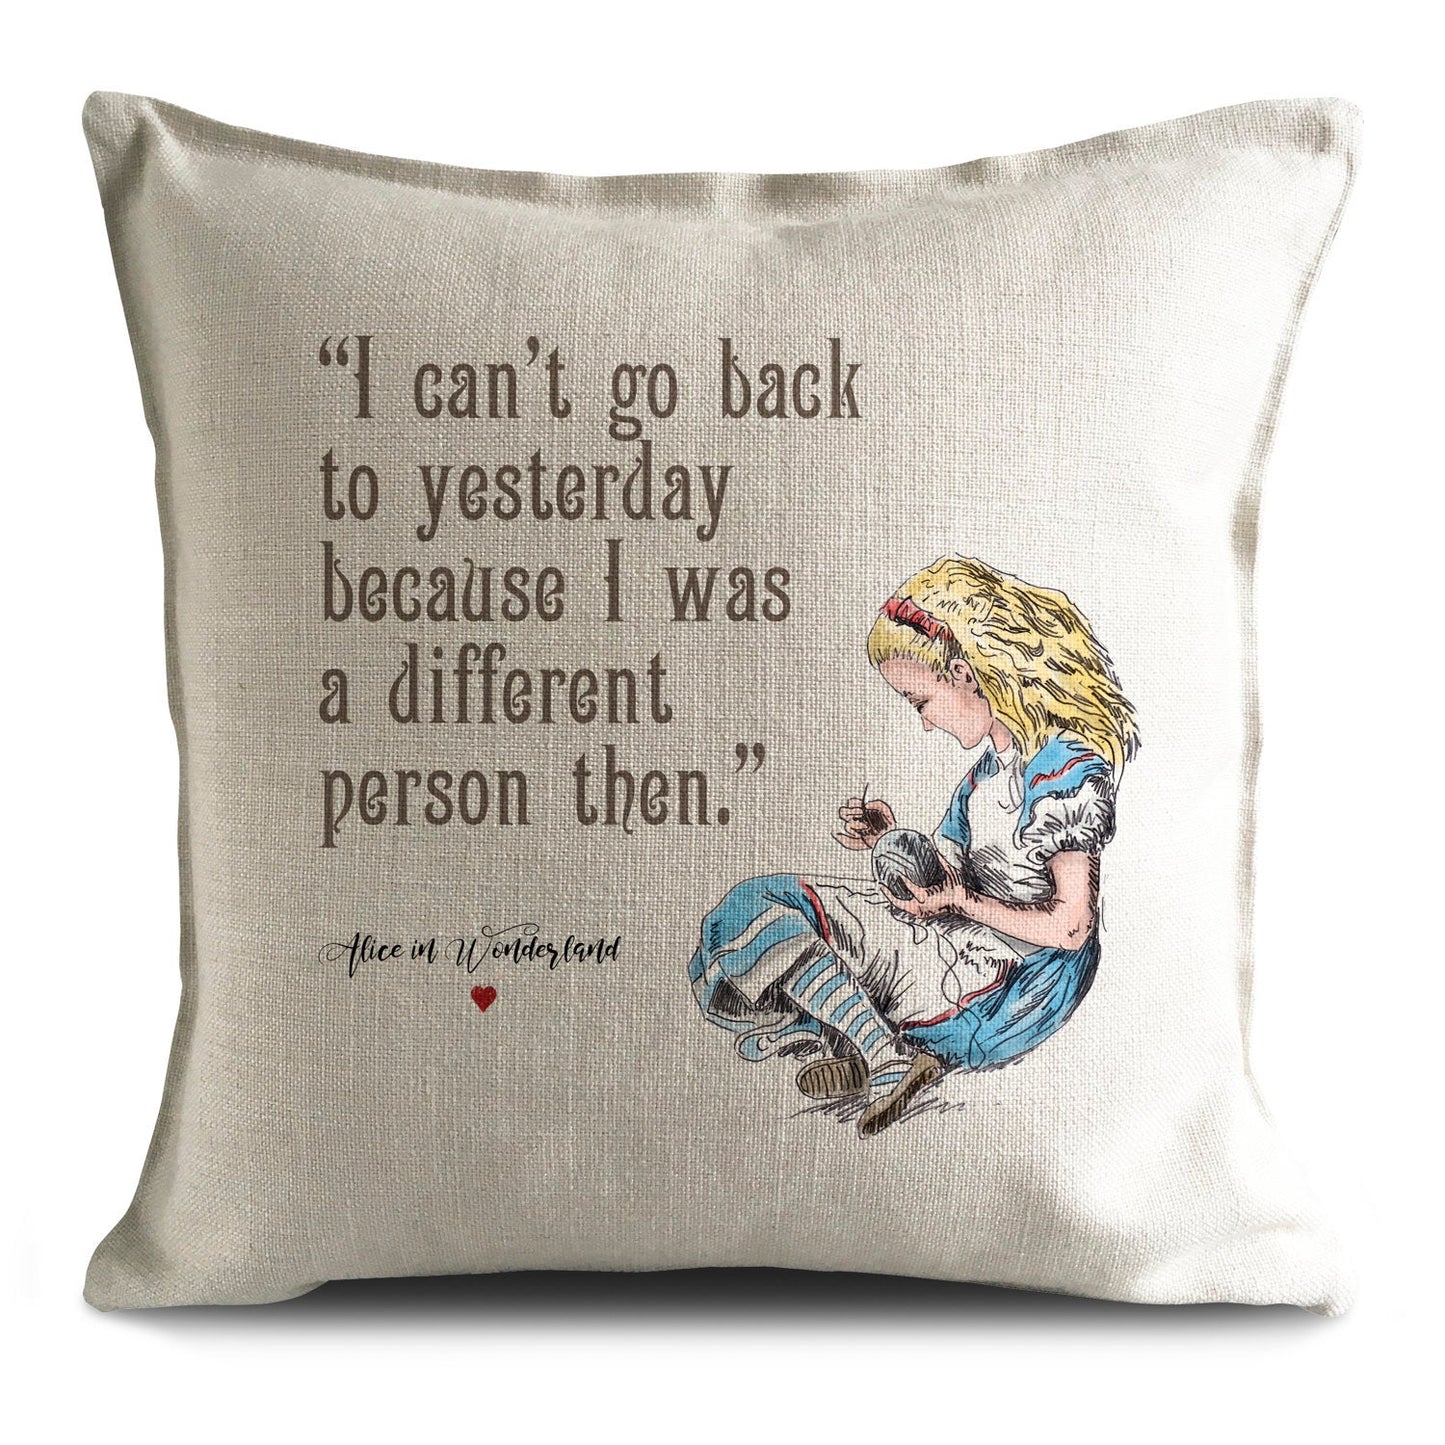 Alice in wonderland cushion cover with can't go back to yesterday quote